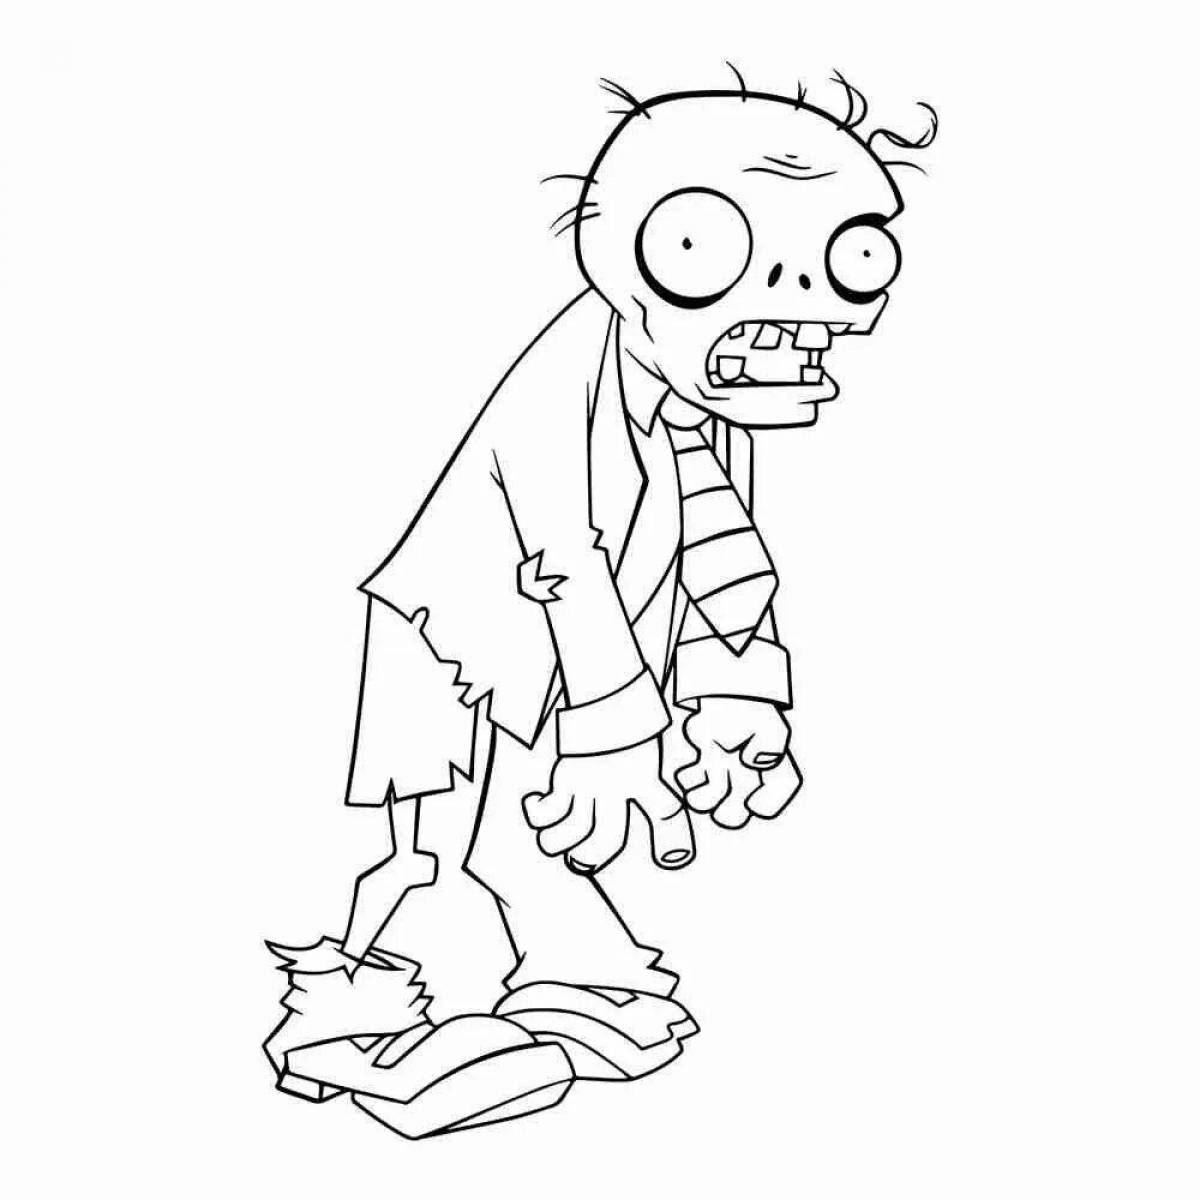 Incredible coloring book doctor zombie boss